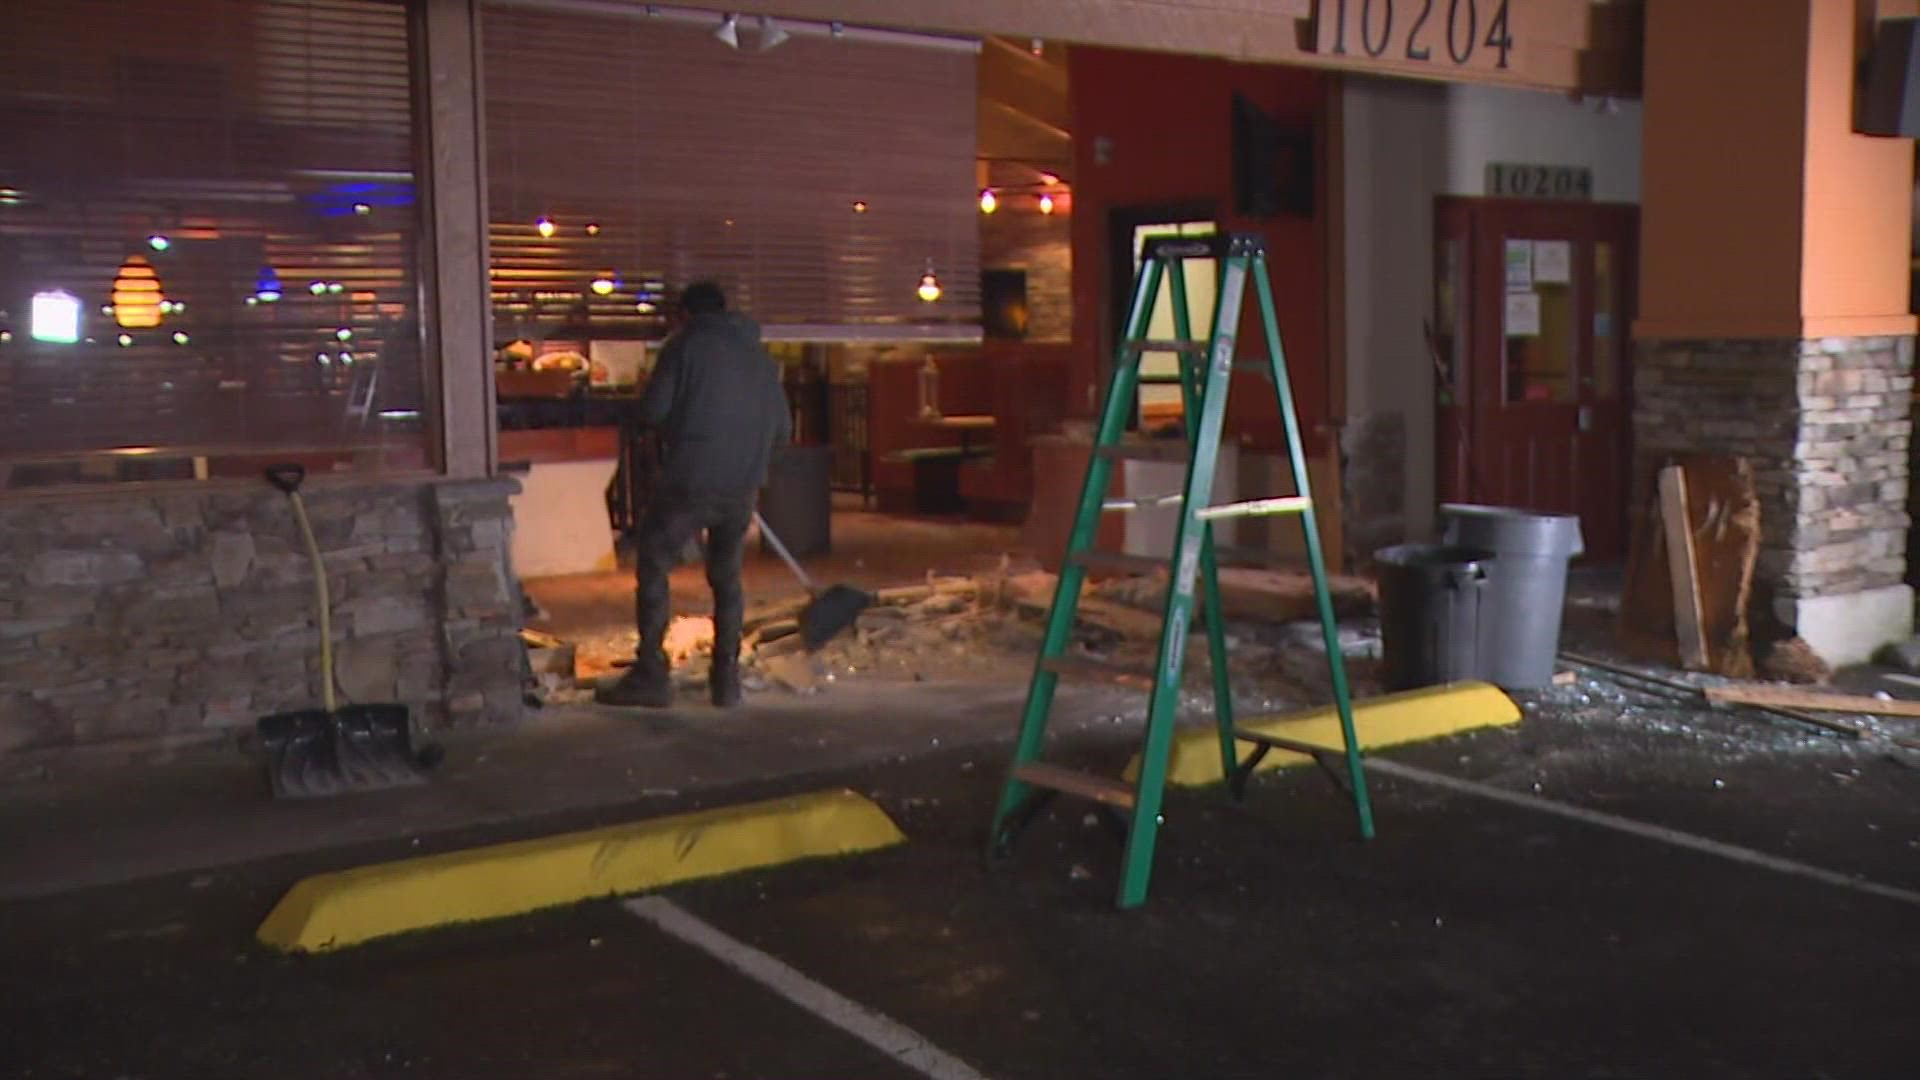 Police are investigating after a vehicle slammed into the front of a restaurant in Lakewood early Monday morning.